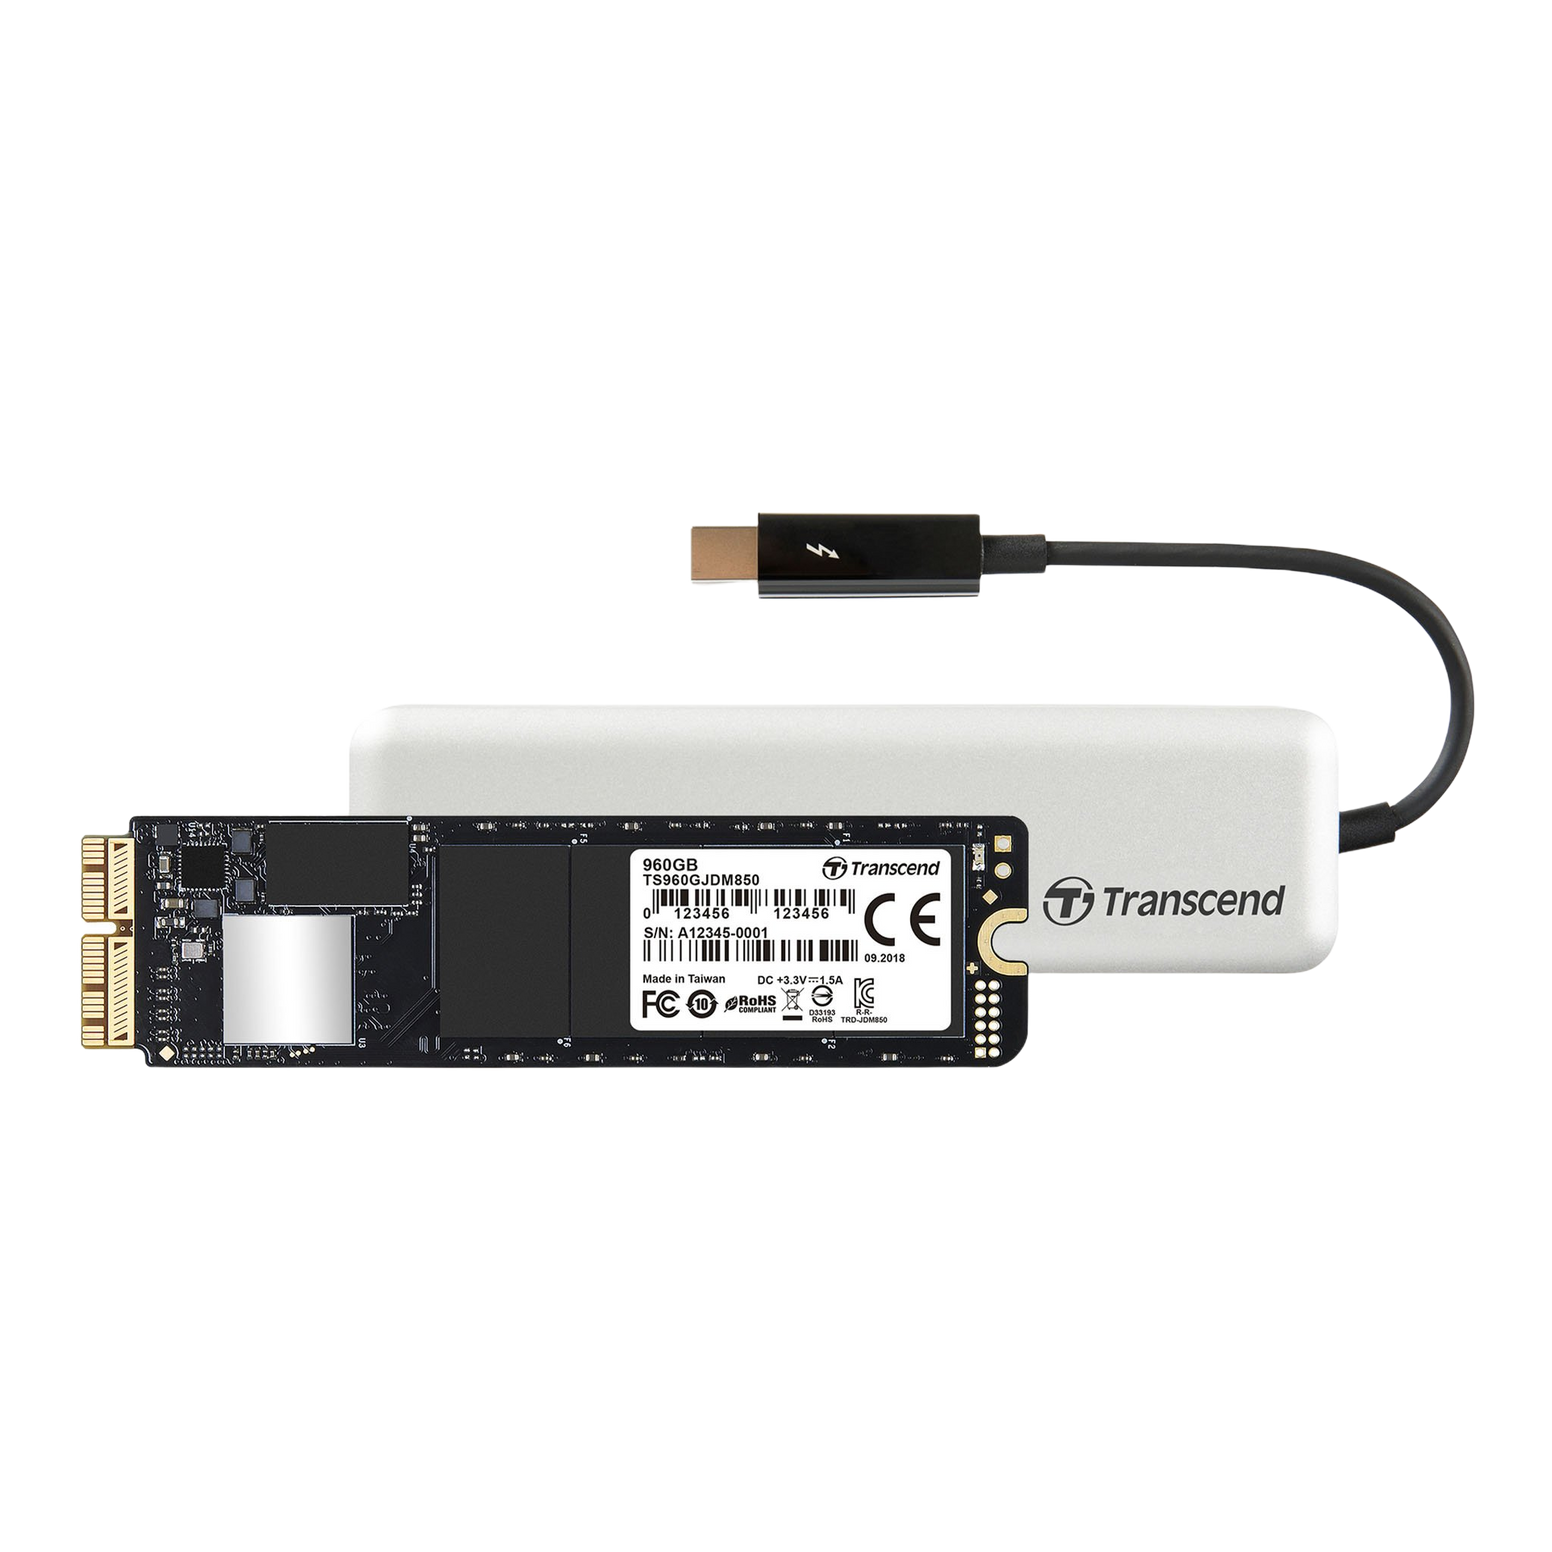 Transcend 480GB Jet Drive 855 Upgrade Kit for MacBook Pro (Late 2013 - Early 2015), MacBook Air (Mid 2013 - Early 2015), Mac mini (Late 2014), Mac Pro (Late 2013) - NVMe Gen3 x4